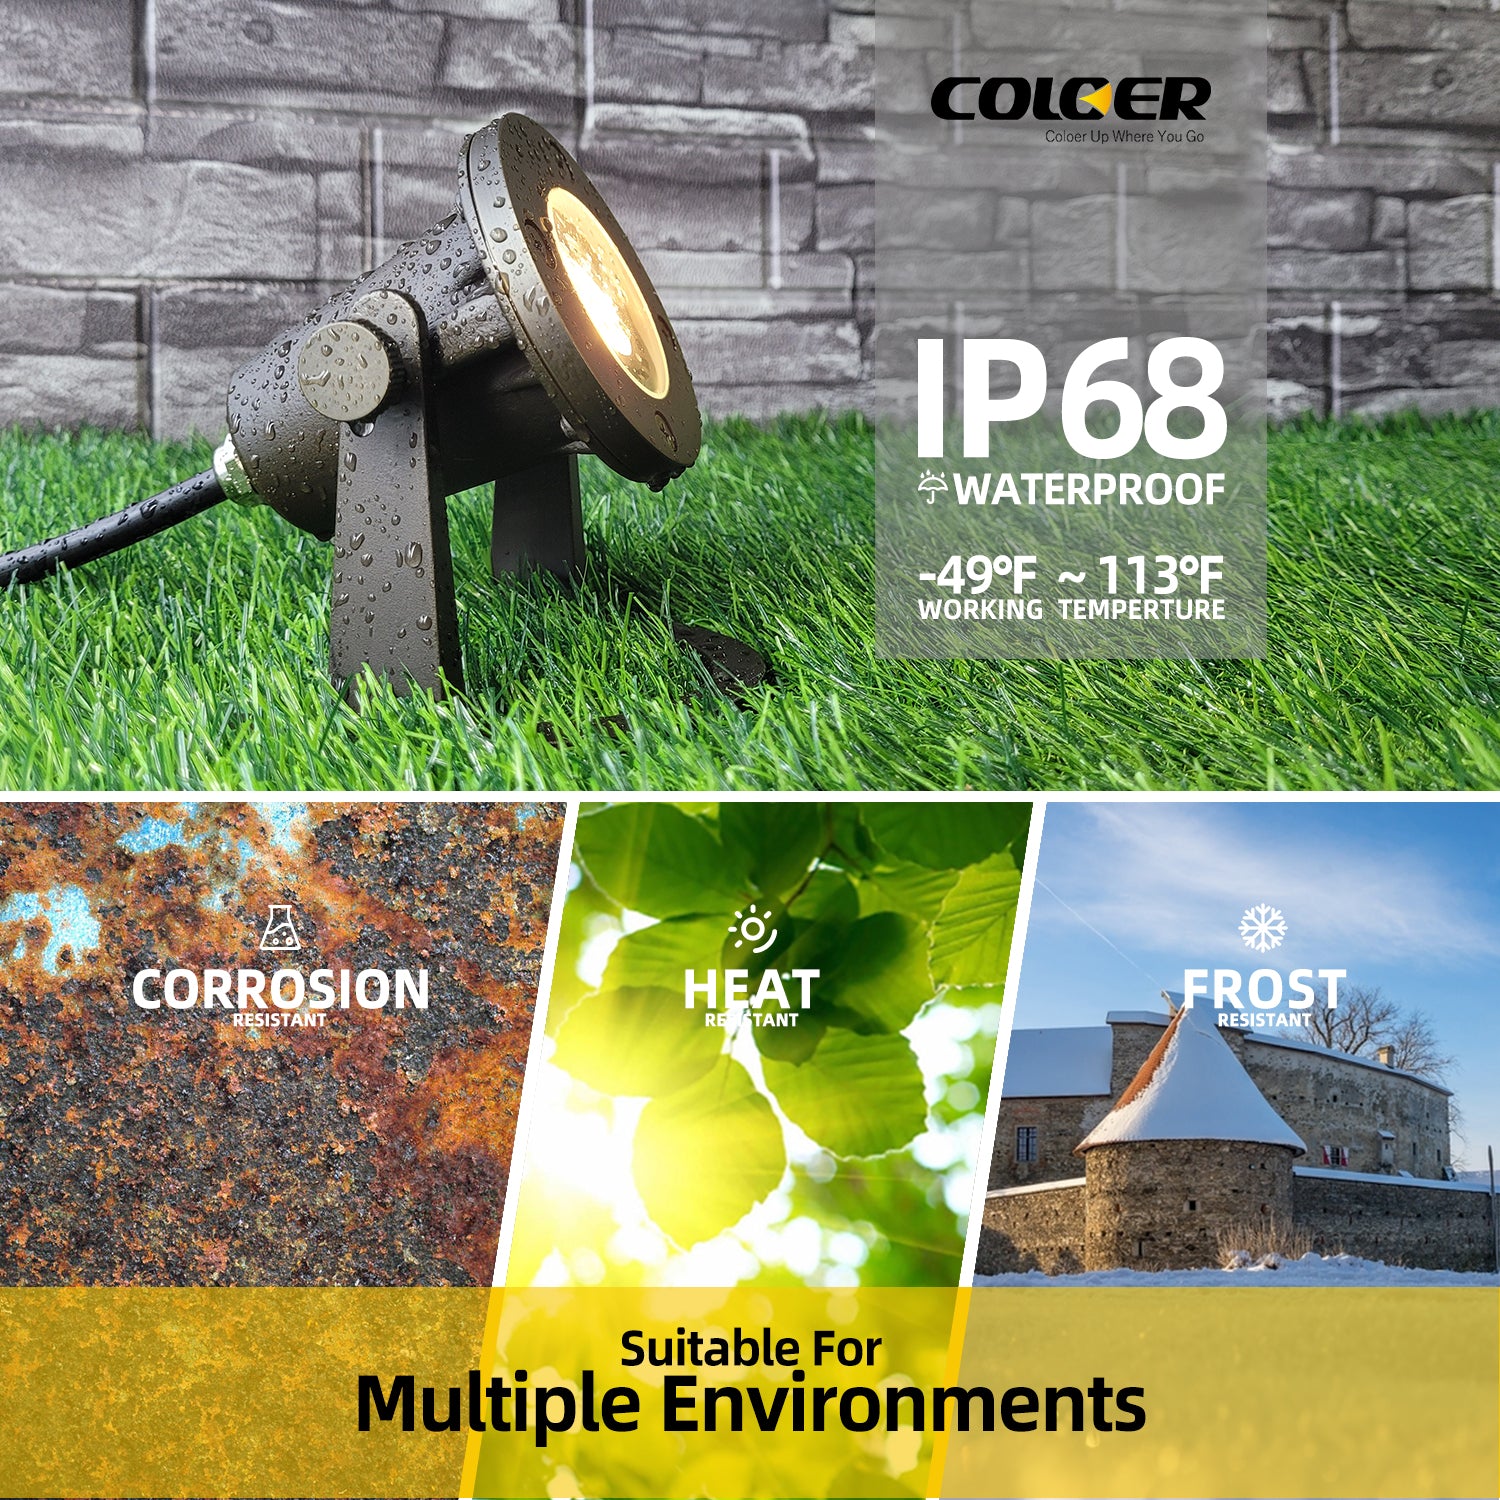 COLOER IP68 waterproof brass underwater light on grass with corrosion, heat, and frost resistance, suitable for multiple environments